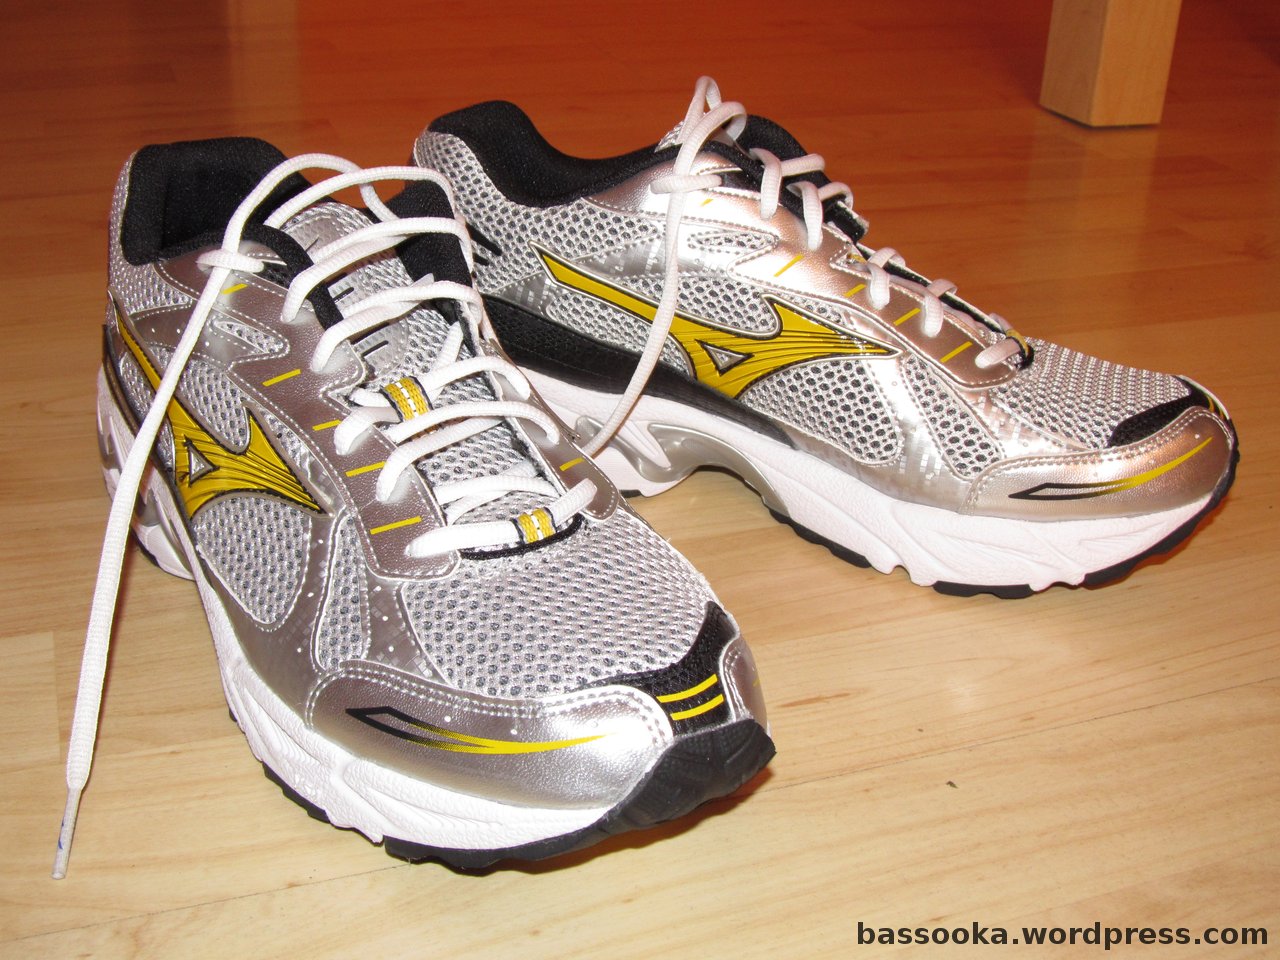 mizuno wave mustang 5 Sale,up to 40% Discounts